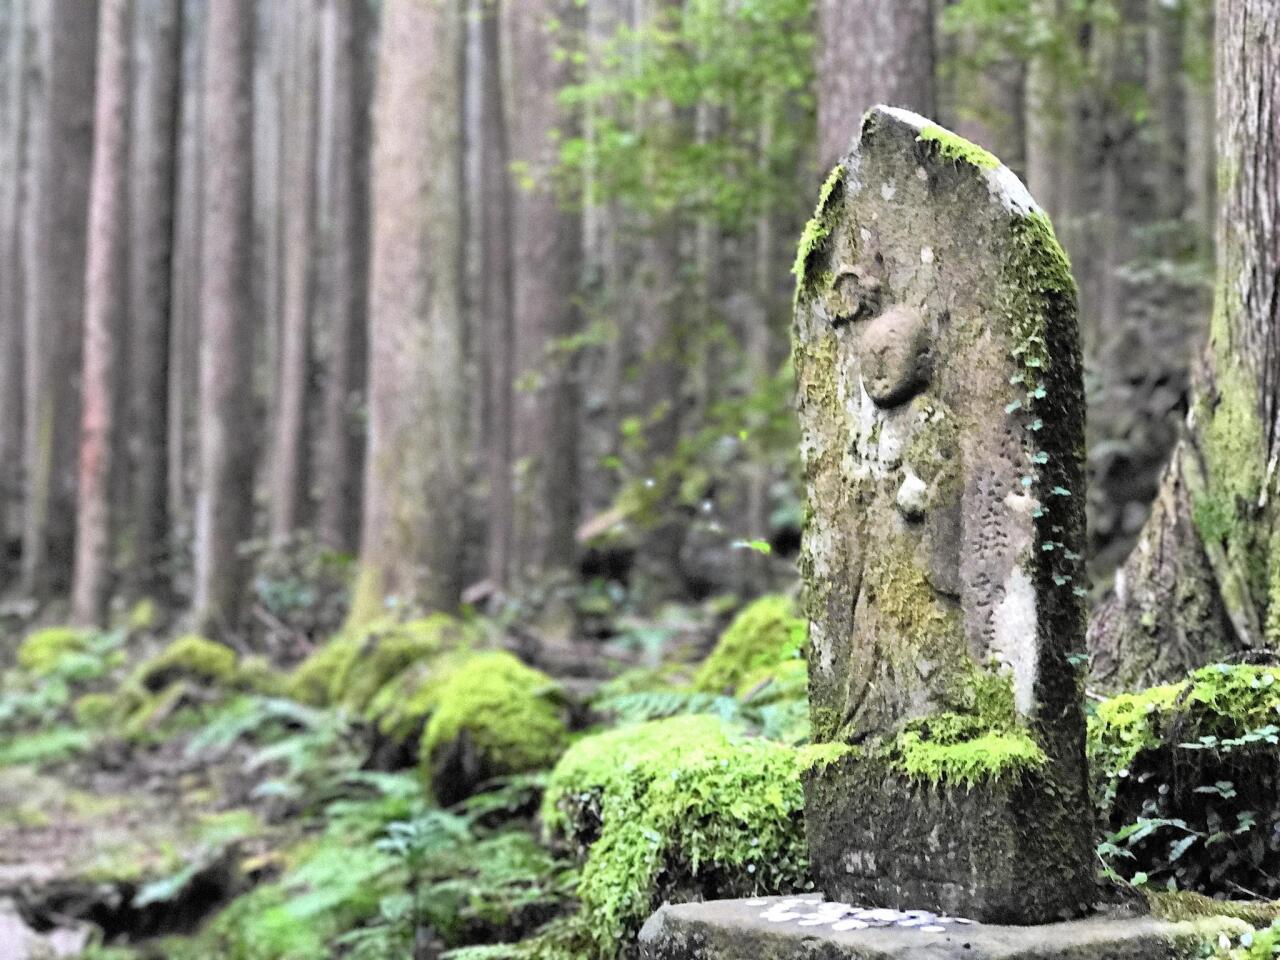 A moss-covered shrine greets travelers along the Kumano Kodo pilgrimage trail. Hundreds of these minor, nameless shrines, or oji, line the path where they have stood for at least 500 years, offering blessings and an opportunity for prayer and reflection.